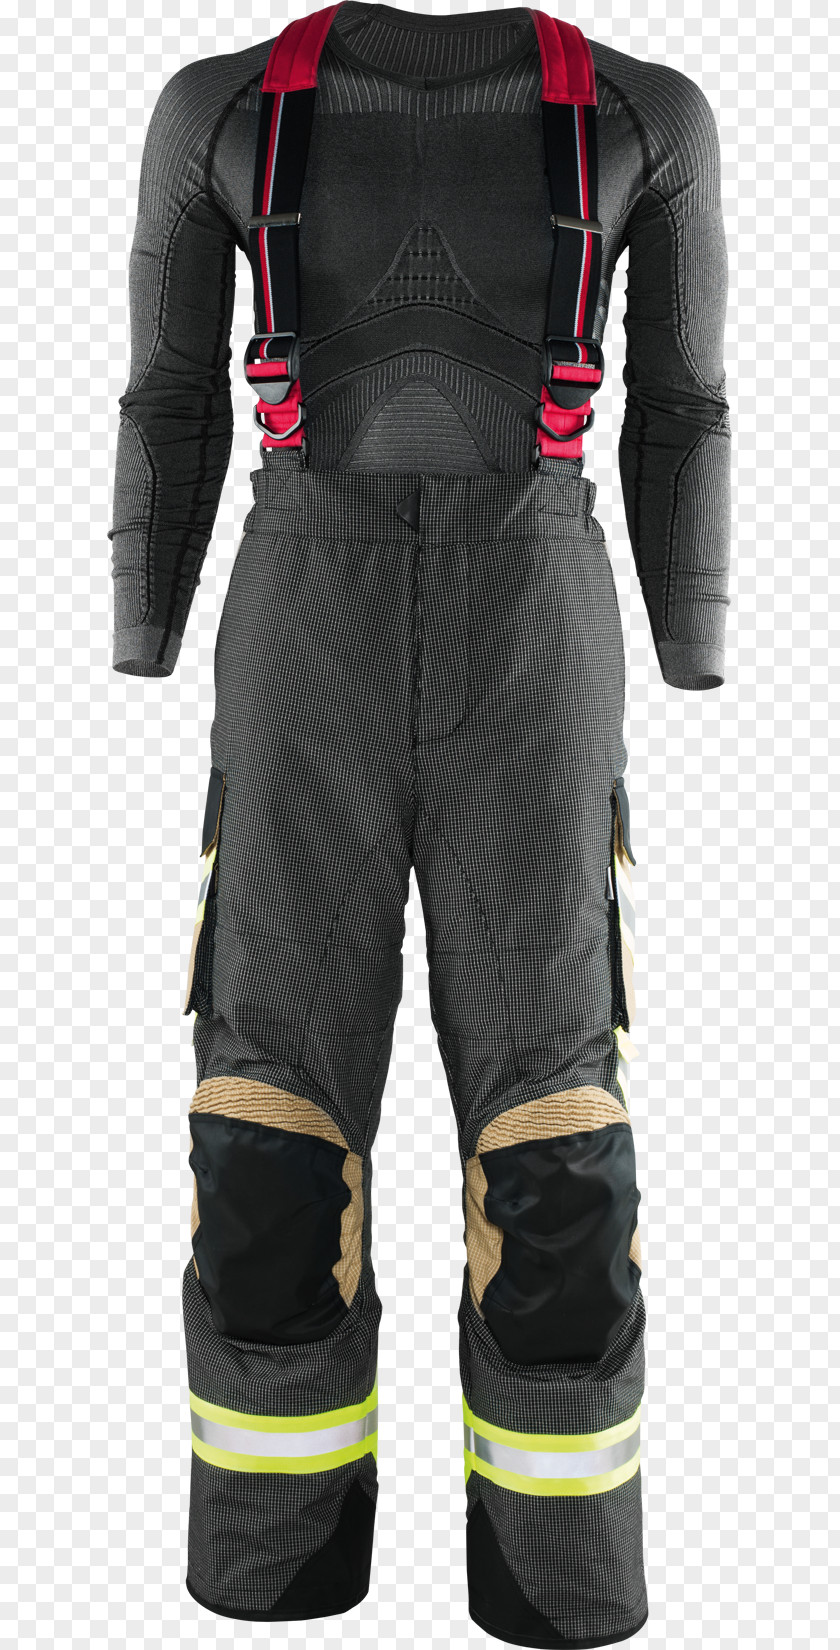 Hose Equipment Firefighter Fire Department Jacket Clothing PNG